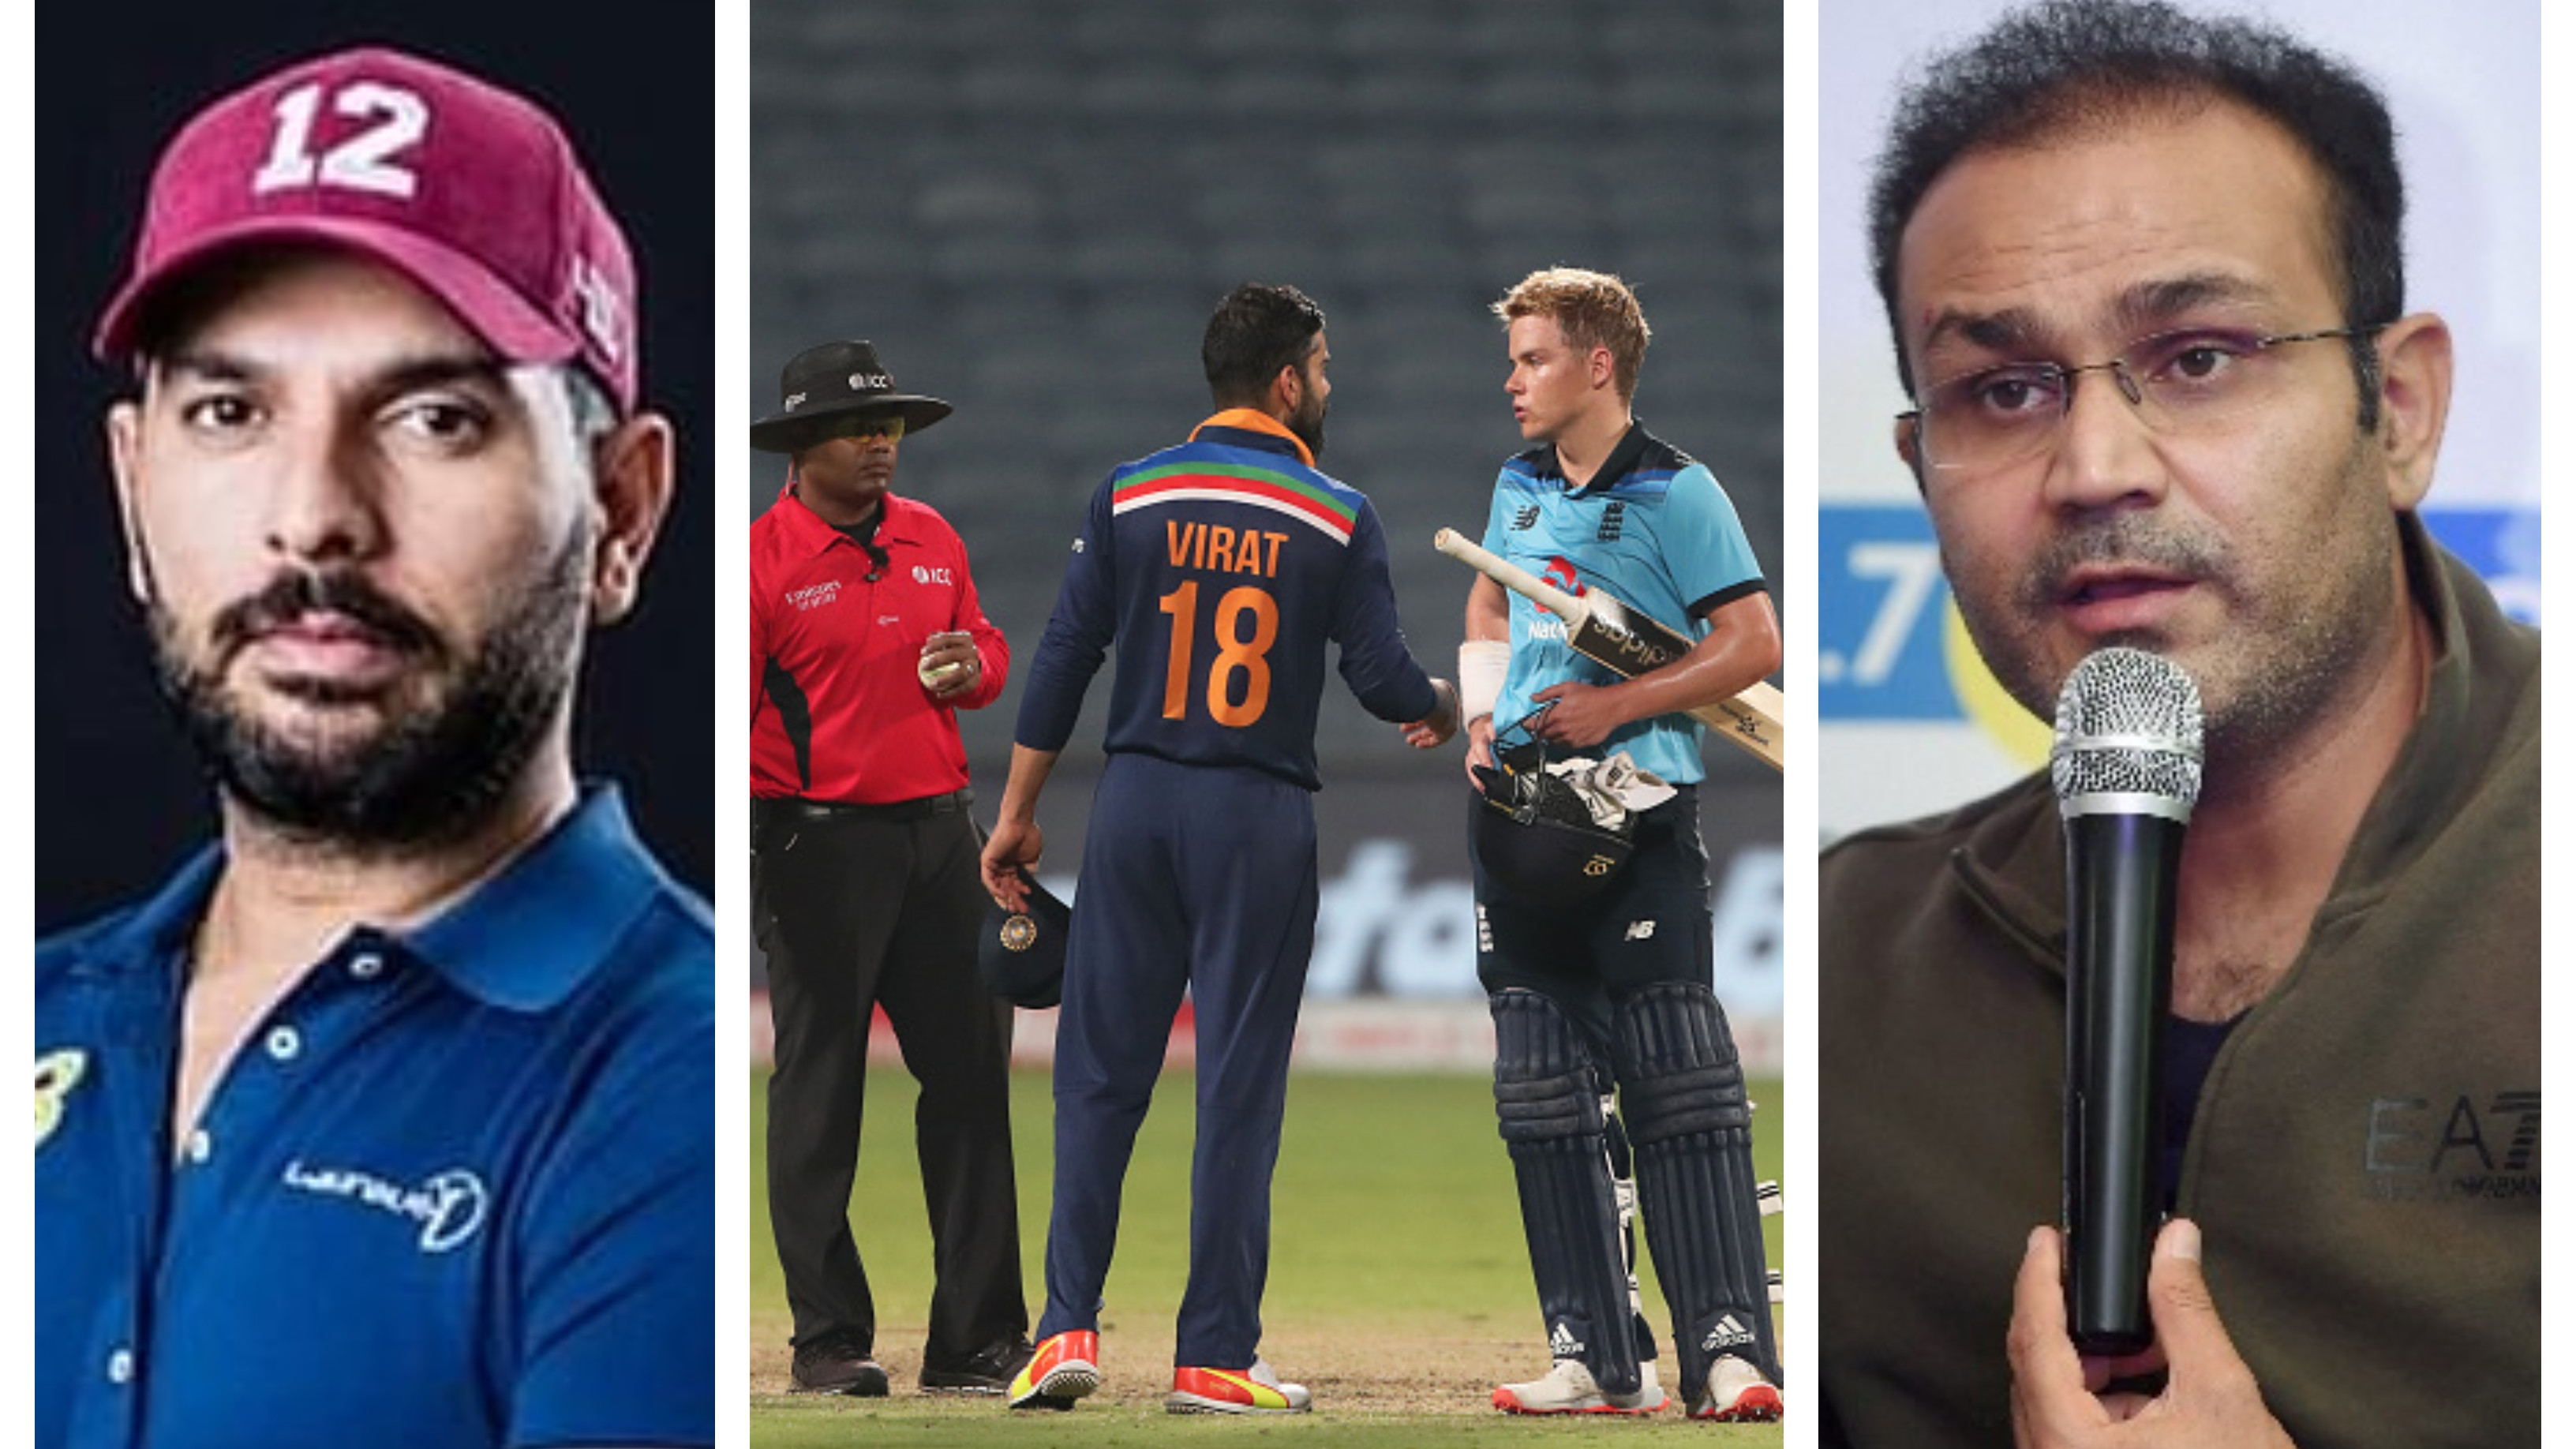 IND v ENG 2021: Cricket fraternity reacts to India’s thrilling victory in series decider despite Sam Curran’s brilliance